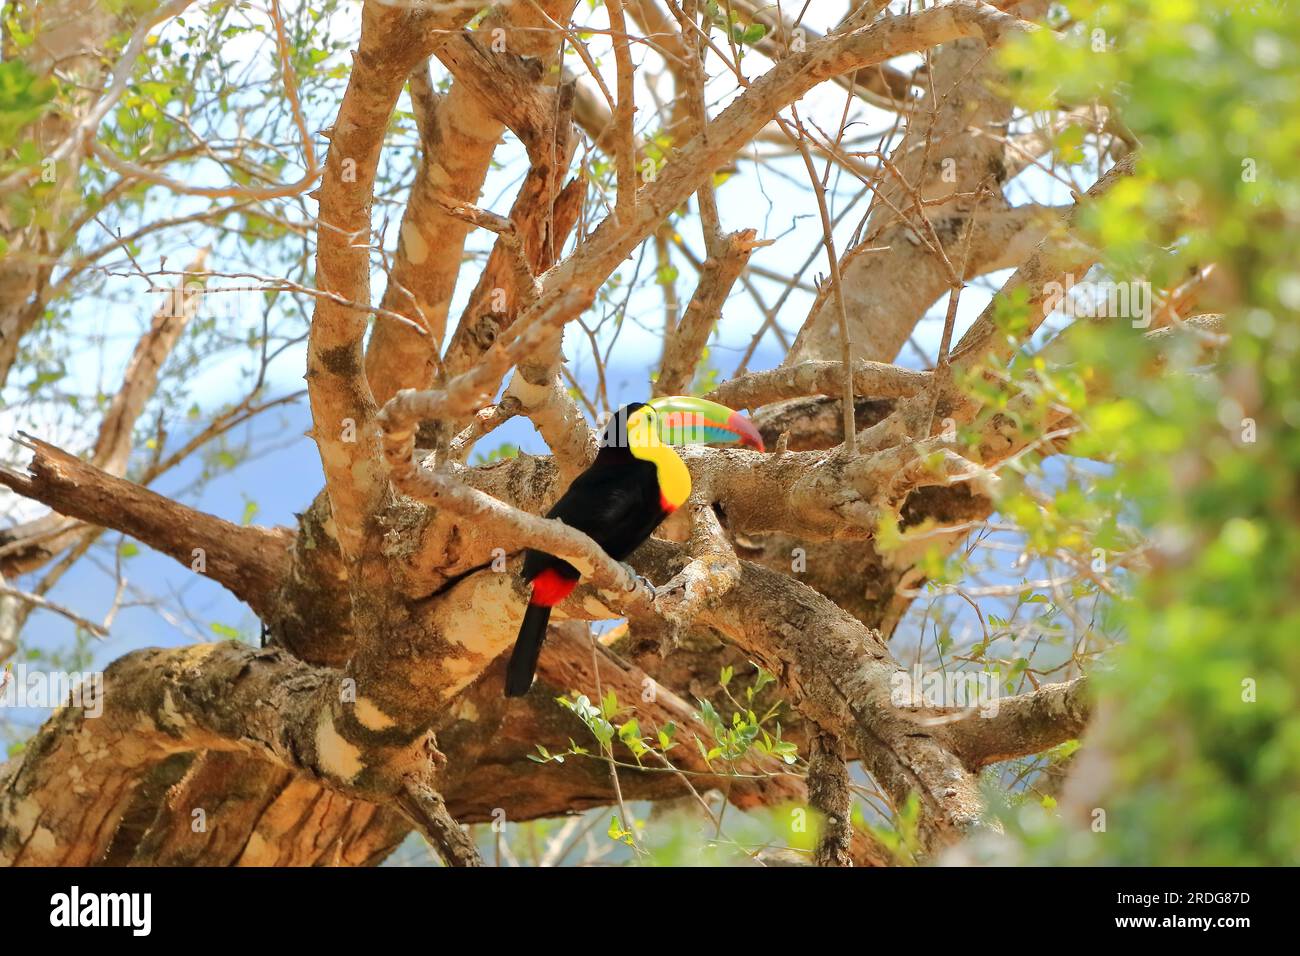 Closeup of a Keel-billed Toucan (Ramphastus sulfuratus) perched on a mossy branch, Costa Rica Stock Photo